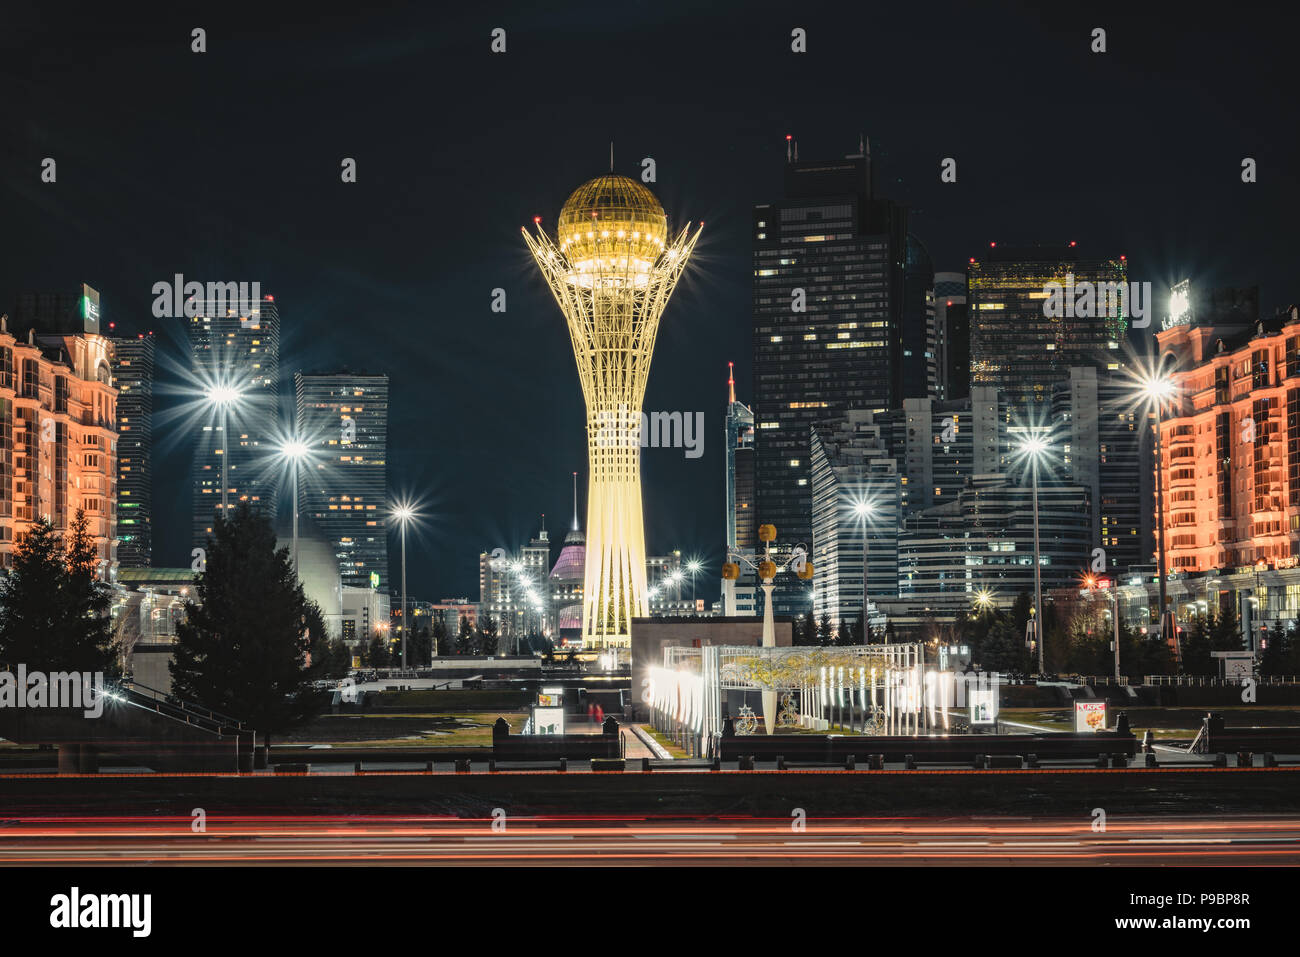 Night view of the Bayterek Tower, a landmark observation tower designed by architect Norman Foster in Astana, the capital of Kazakhstan. Stock Photo